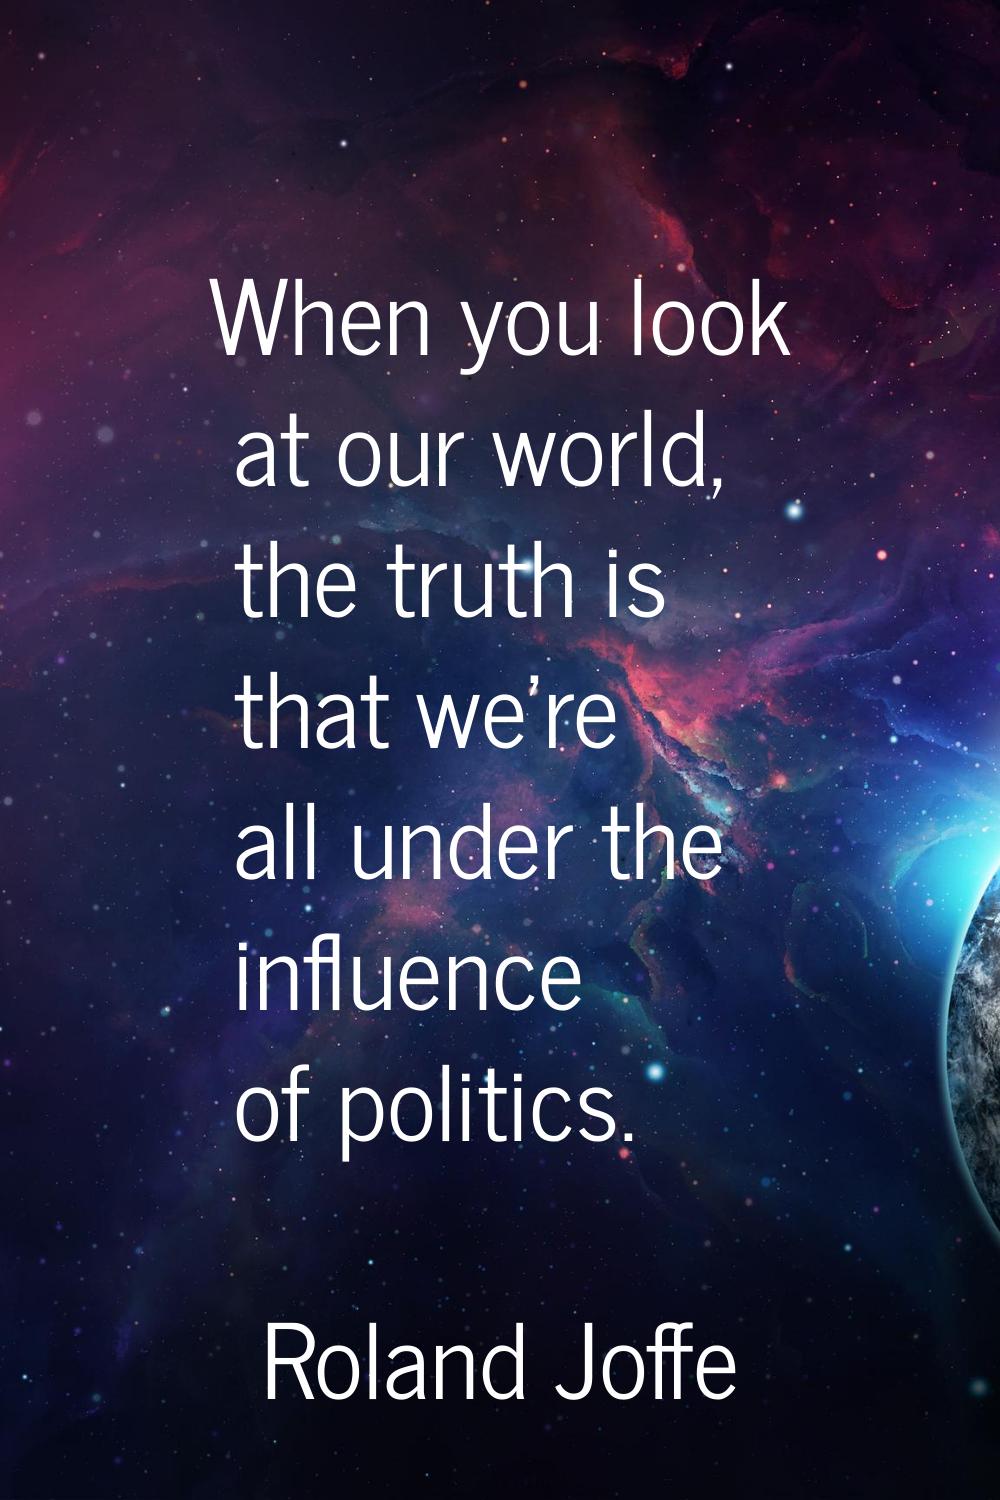 When you look at our world, the truth is that we're all under the influence of politics.